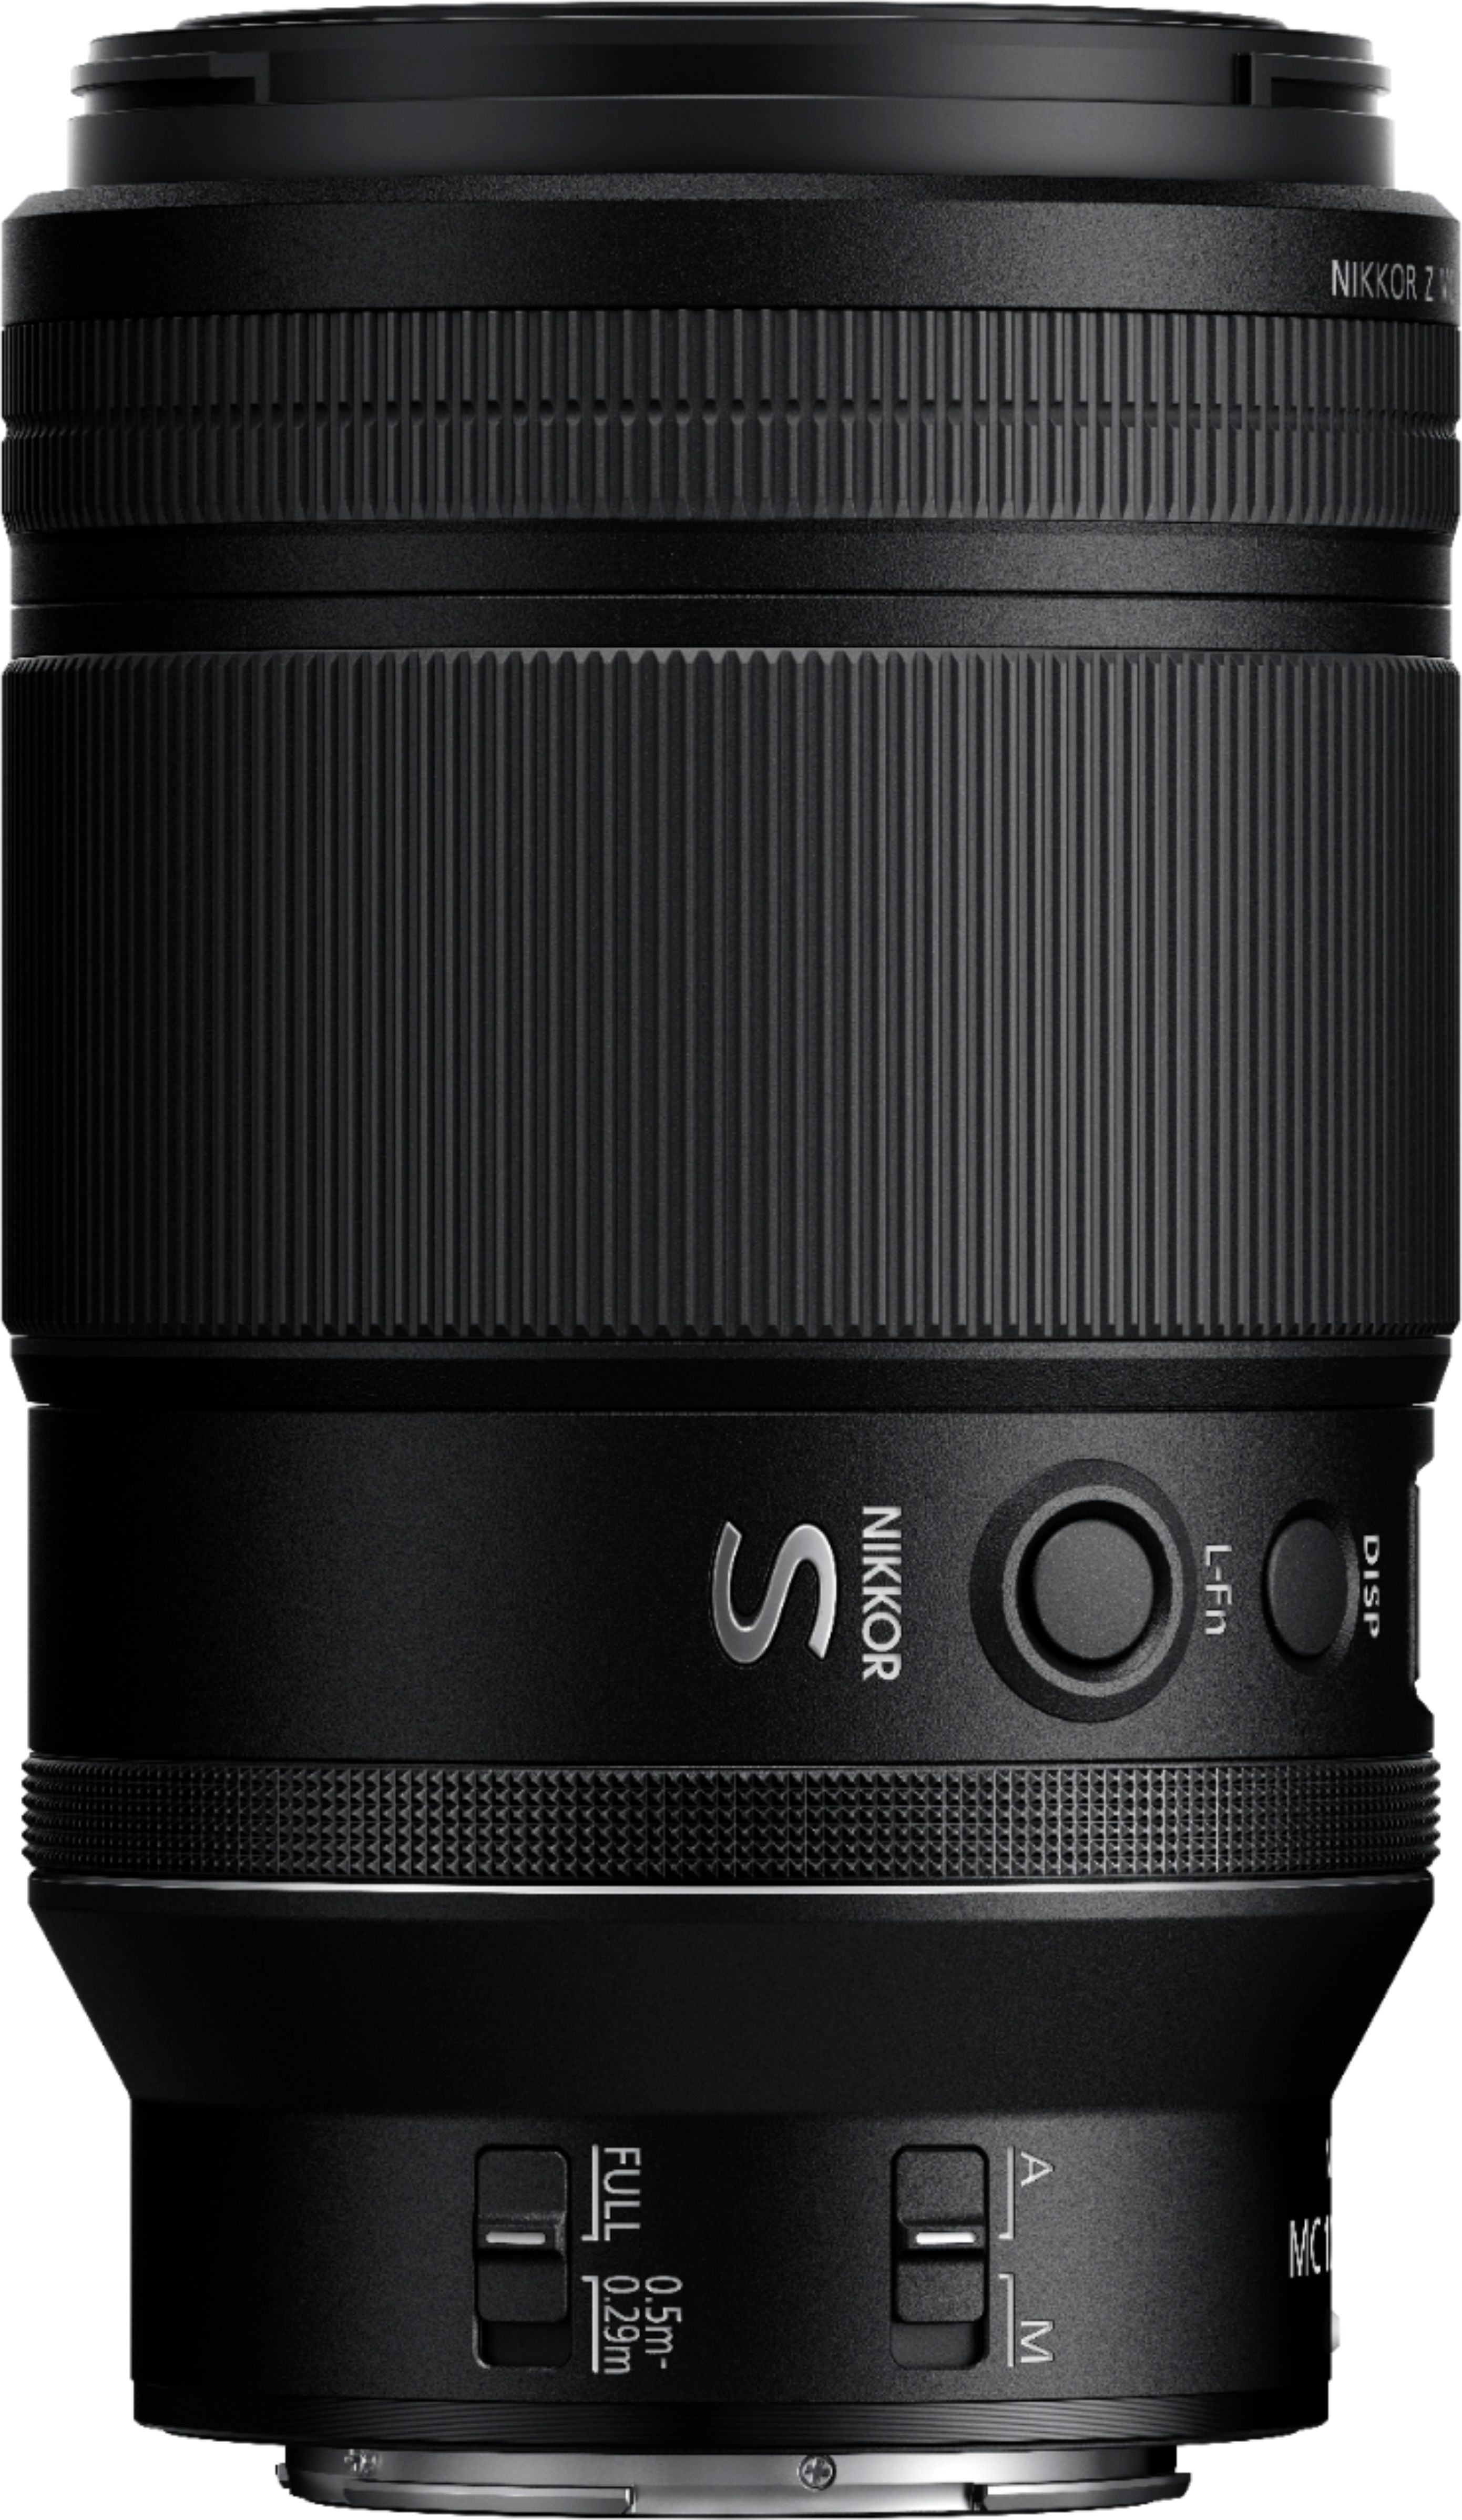 Angle View: Tamron - 70-180mm f/2.8 Di III VXD Telephoto Zoom Lens for Sony E-Mount - Black